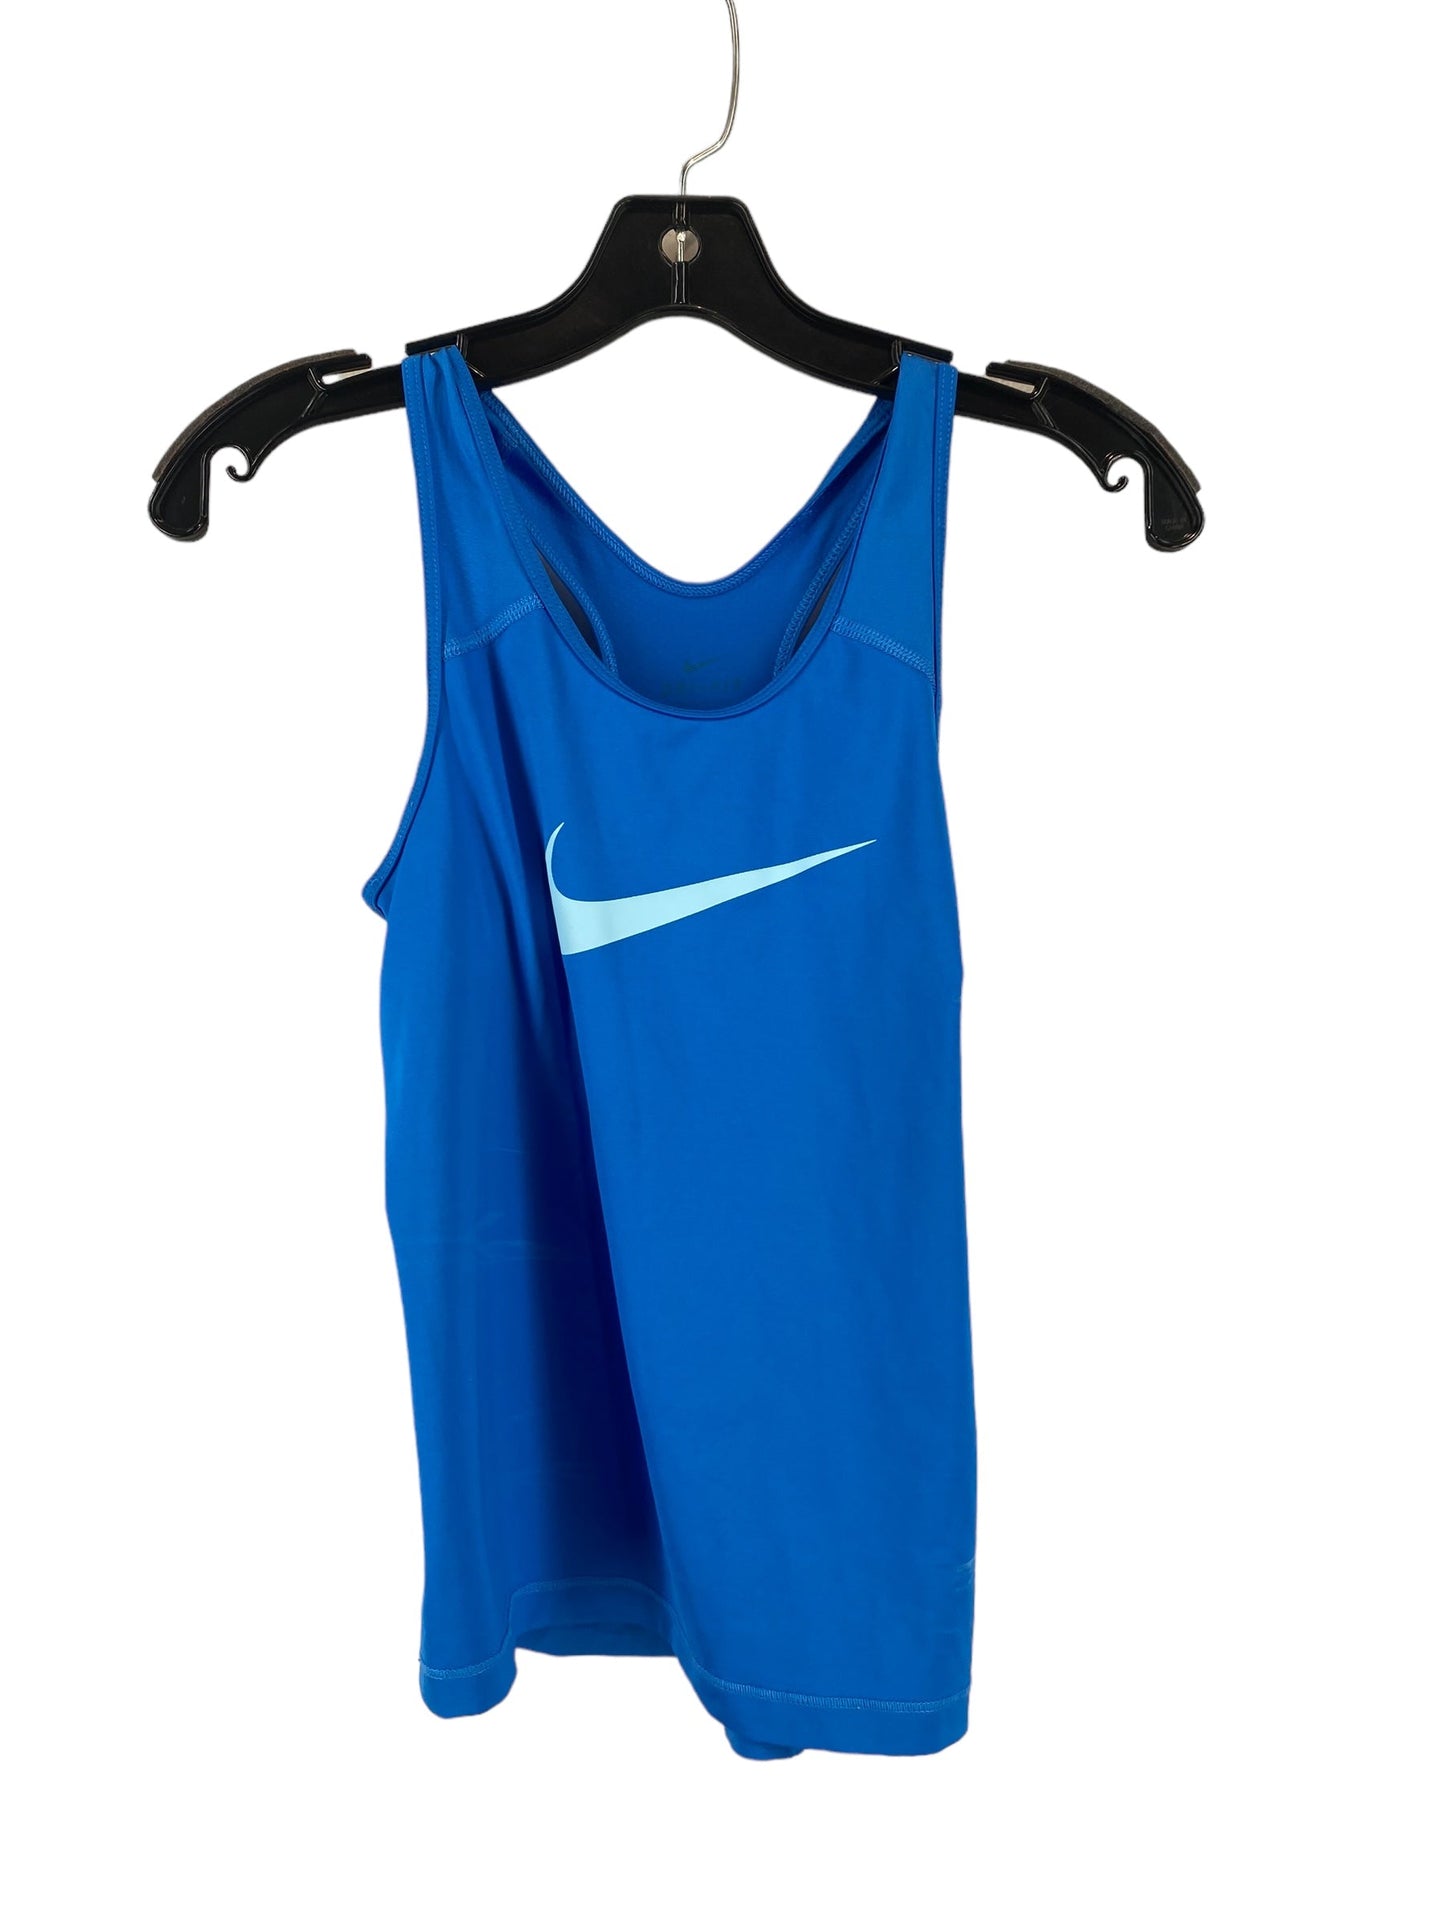 Blue Athletic Tank Top Nike Apparel, Size M